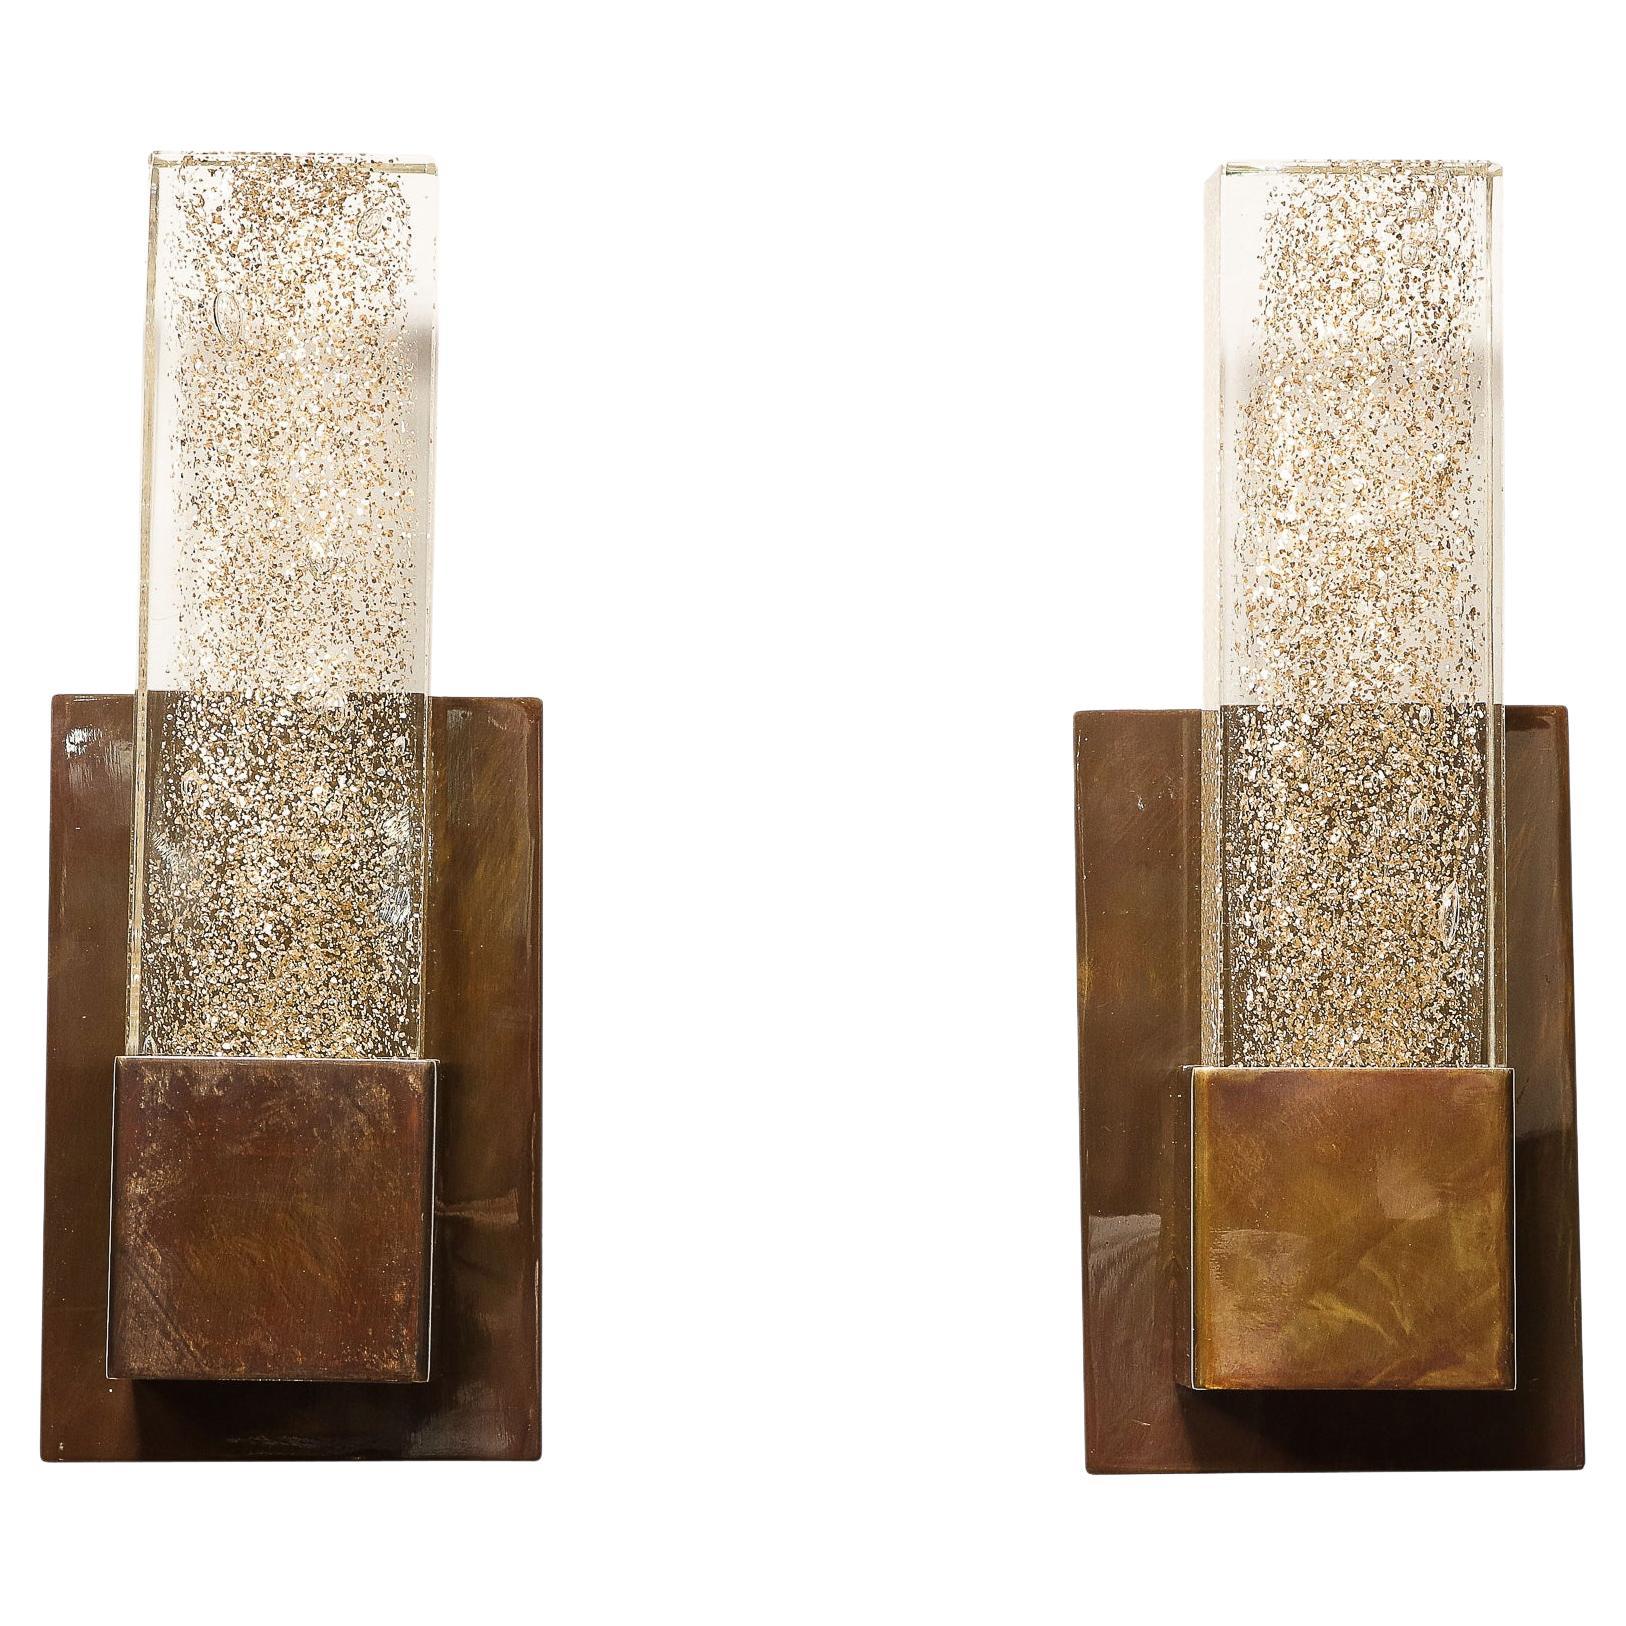 Pair of Handblown Murano Sconces in Glass and Antiqued Brass with 24-Karat Gold